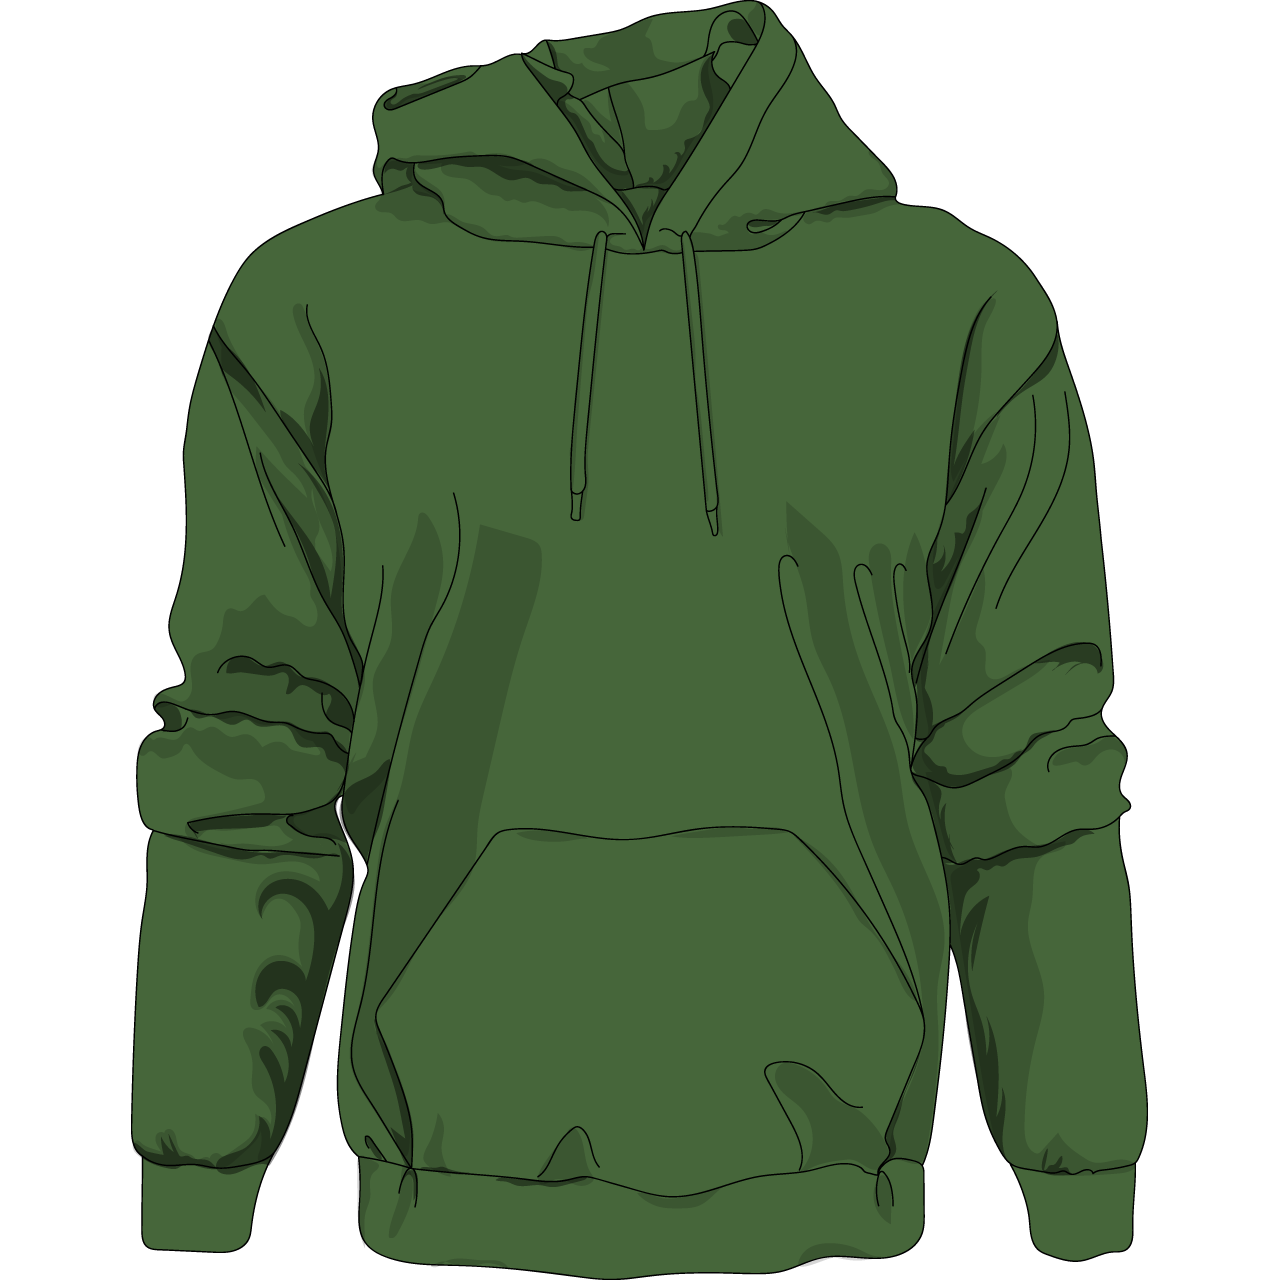 Beautiful green hoodie illustration clipart image transparent background